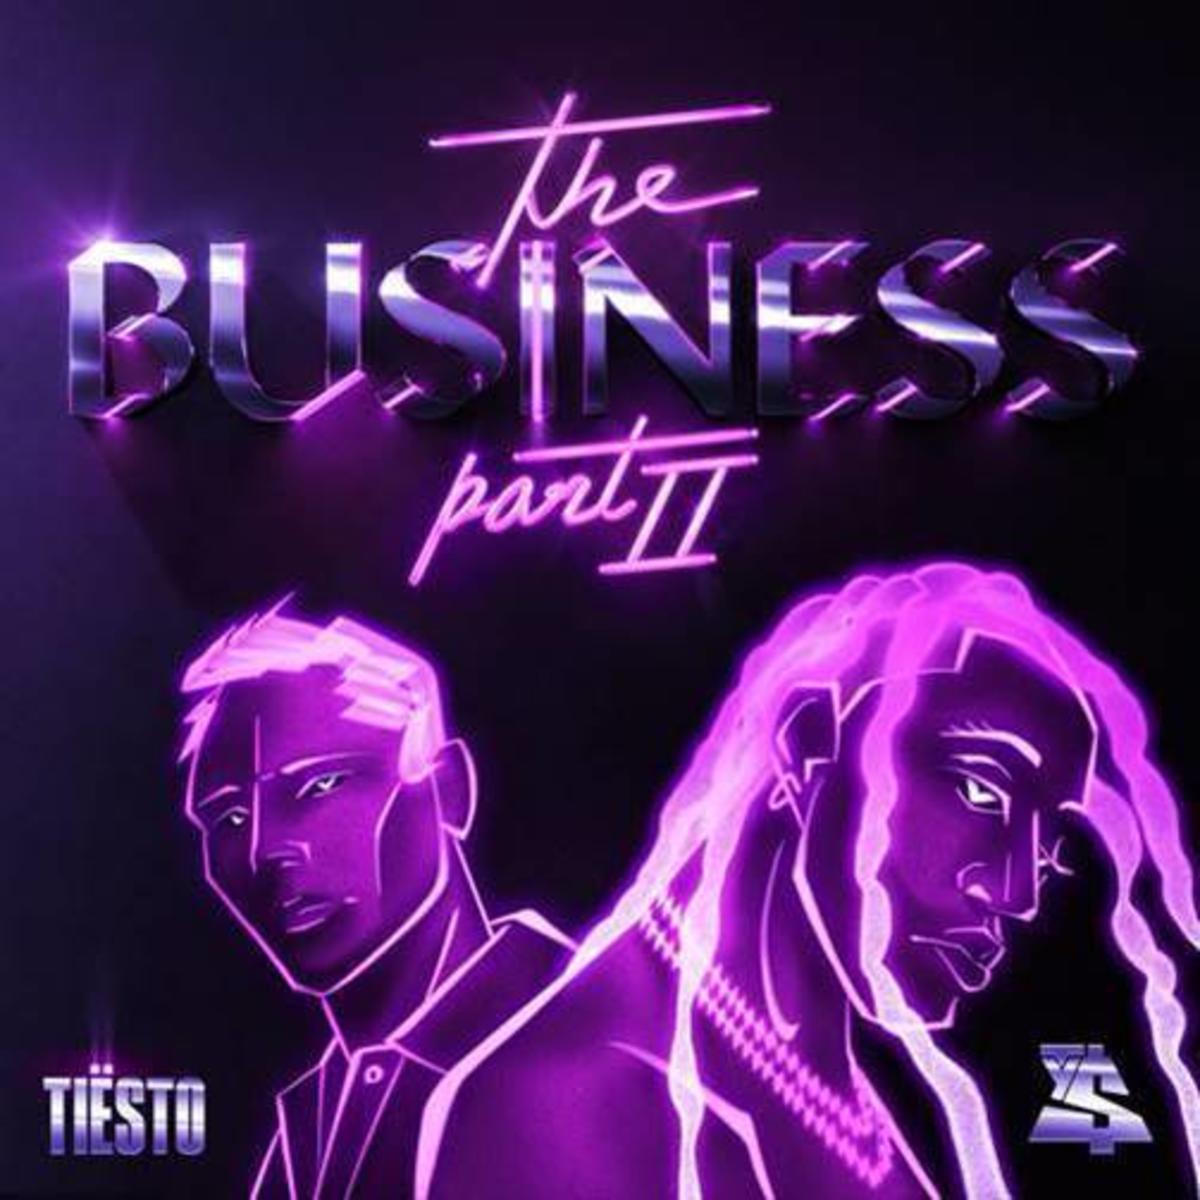 Tiesto & Ty Dolla $ign Aim To Turn Clubs Up With “The Business Part II”